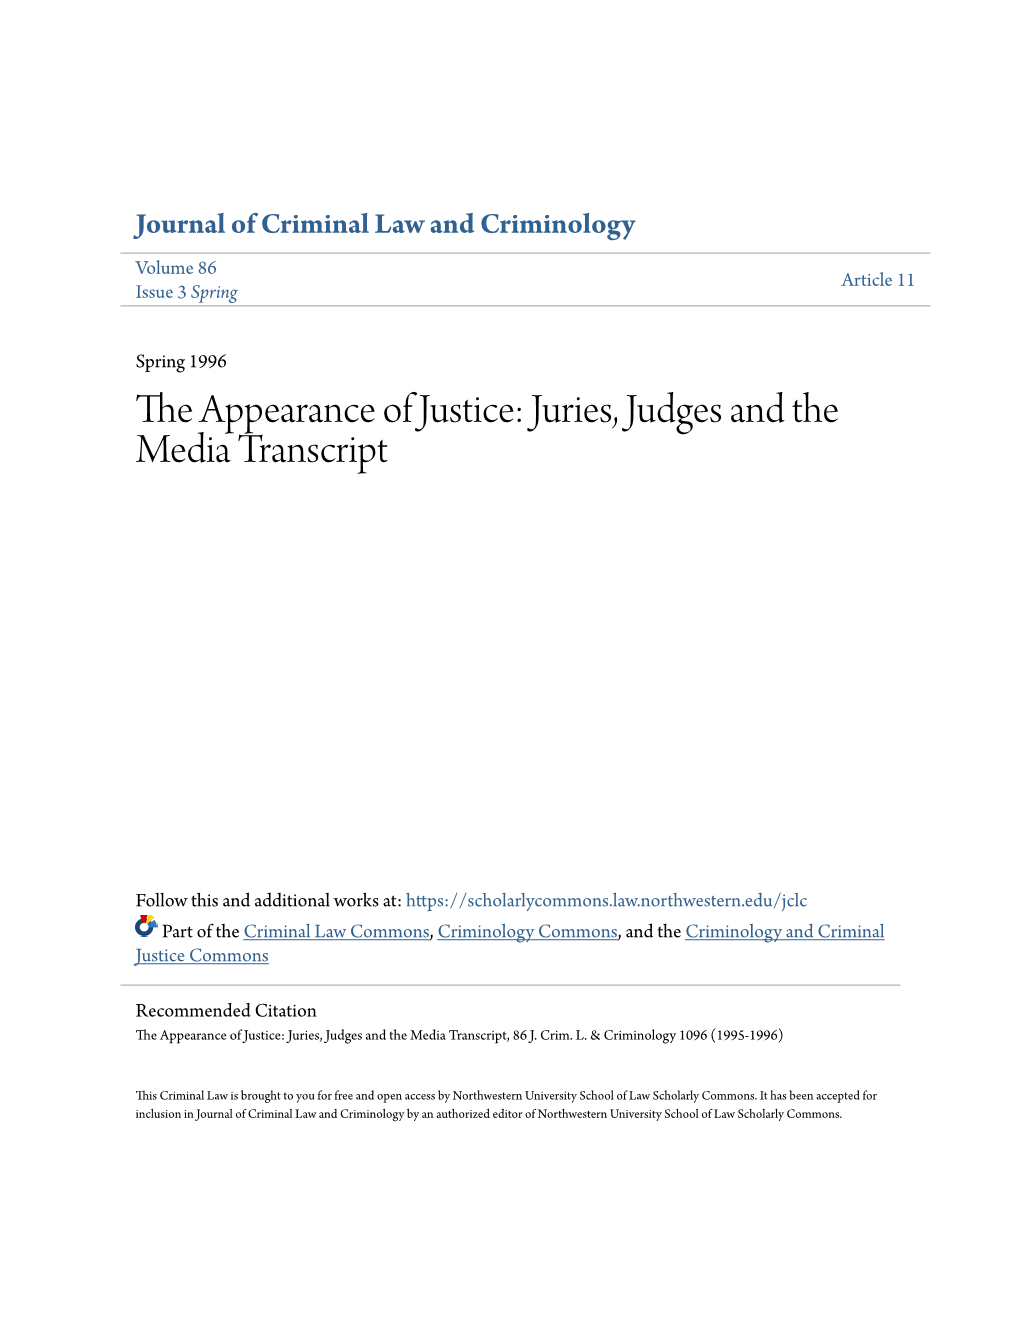 The Appearance of Justice: Juries, Judges and the Media Transcript